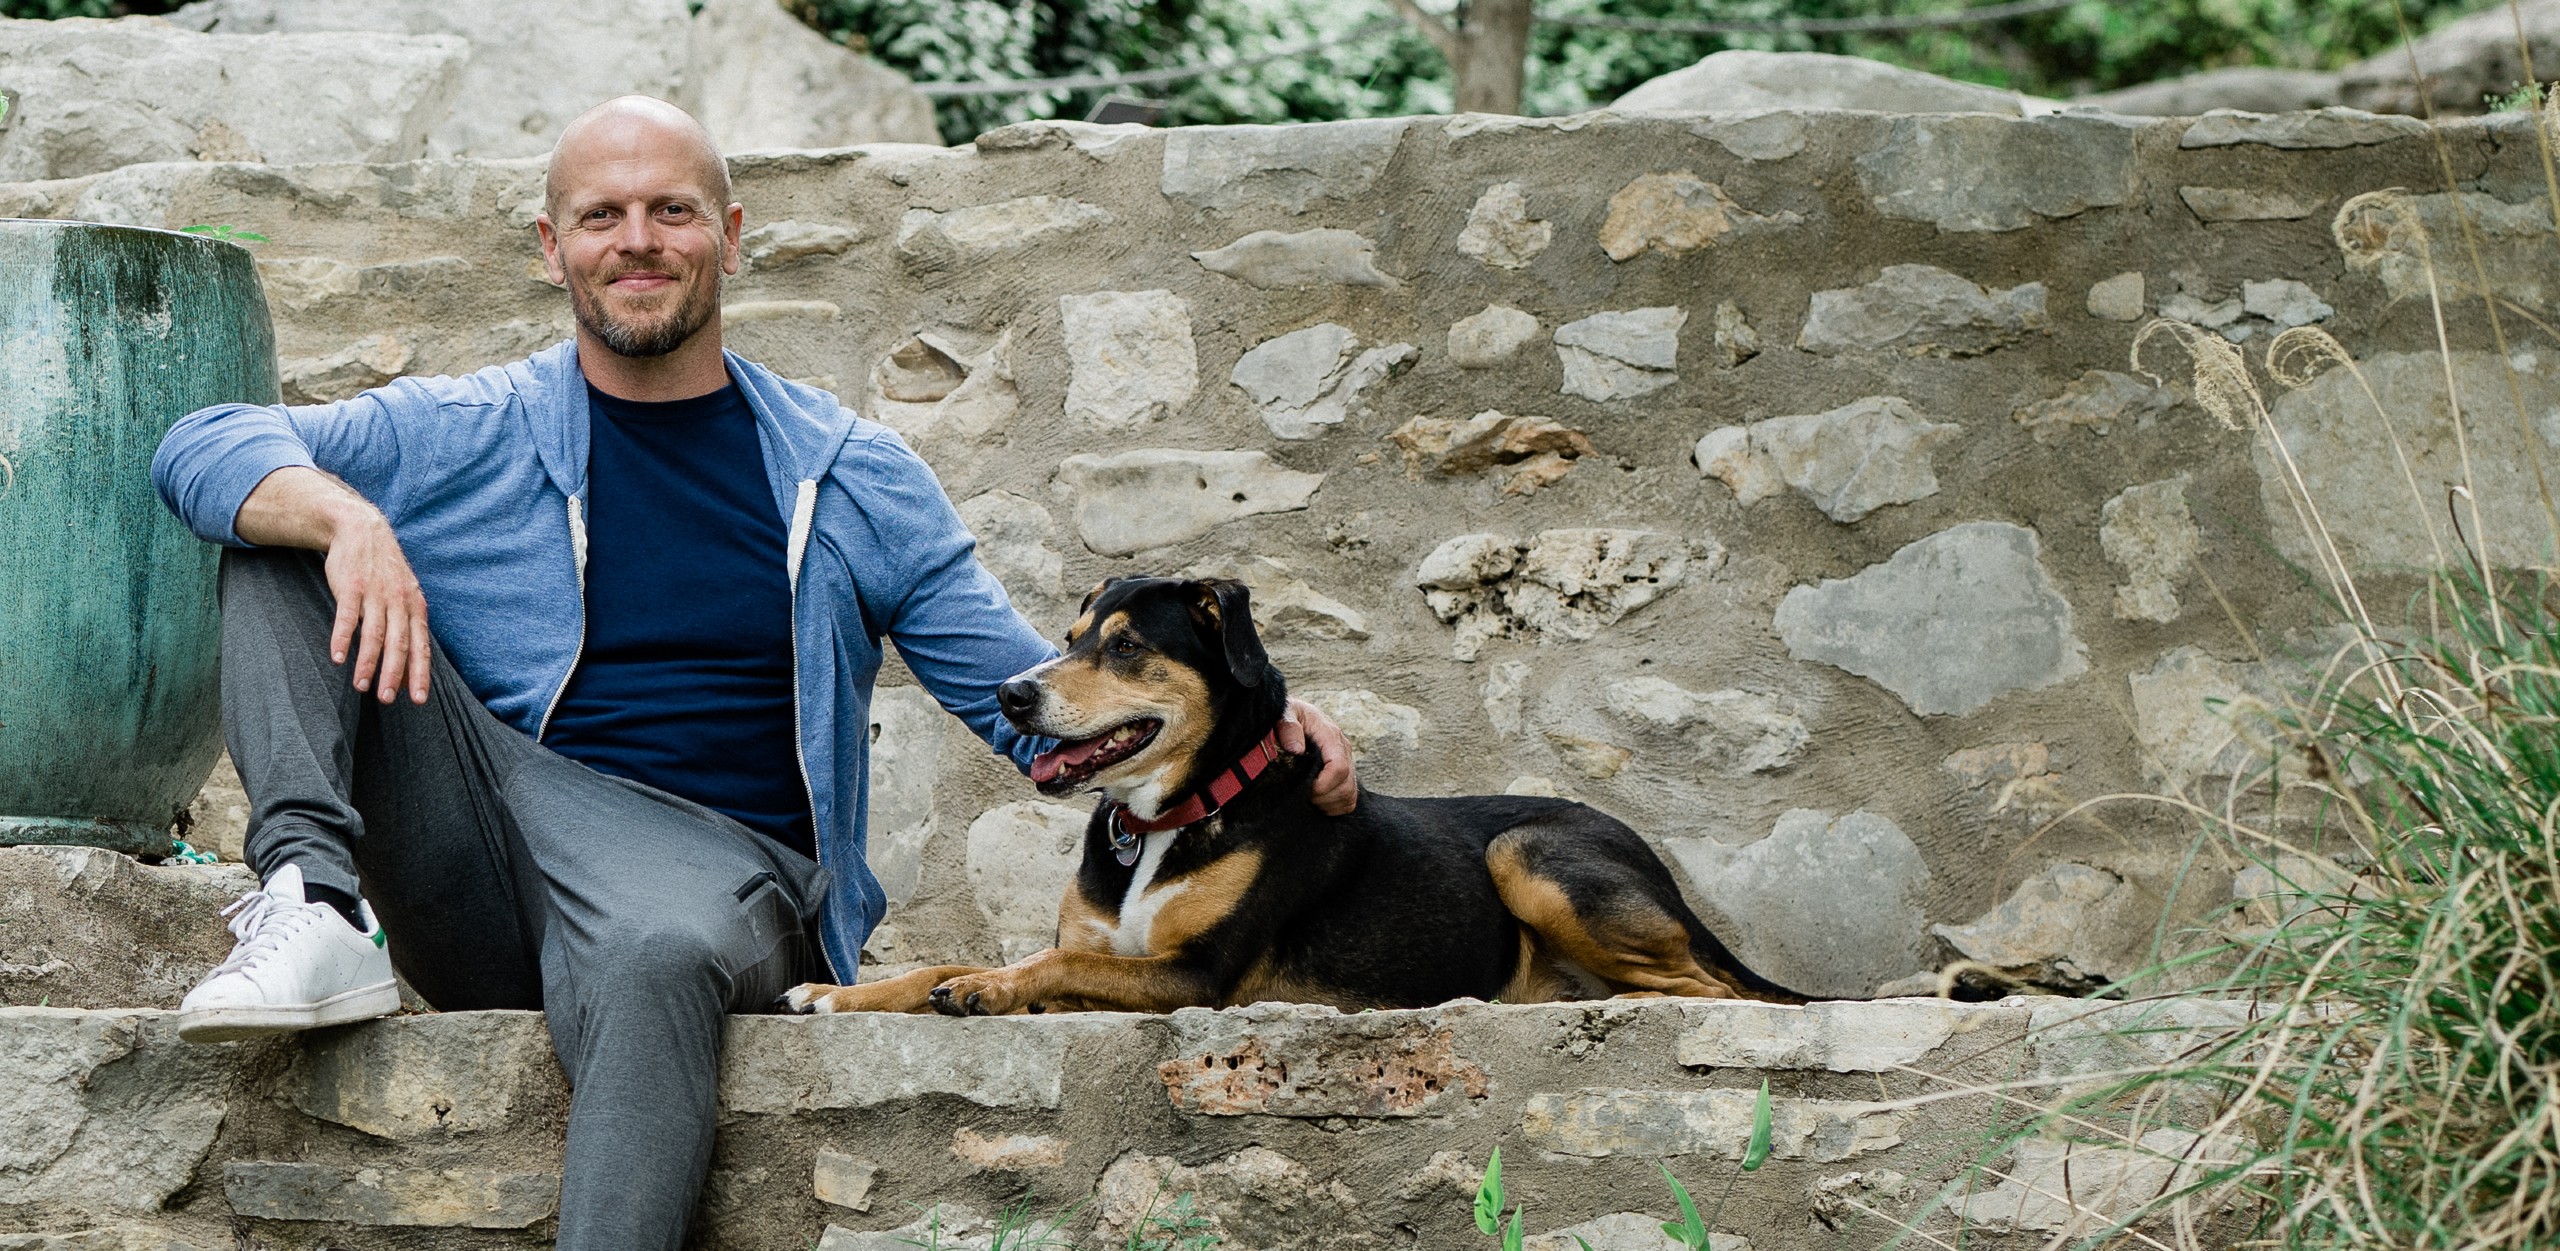 The Blog of Author Tim Ferriss - Tim Ferriss's 4-Hour Workweek and  Lifestyle Design Blog. Tim is an author of 5 #1 NYT/WSJ bestsellers,  investor (FB, Uber, Twitter, 50+ more), and host